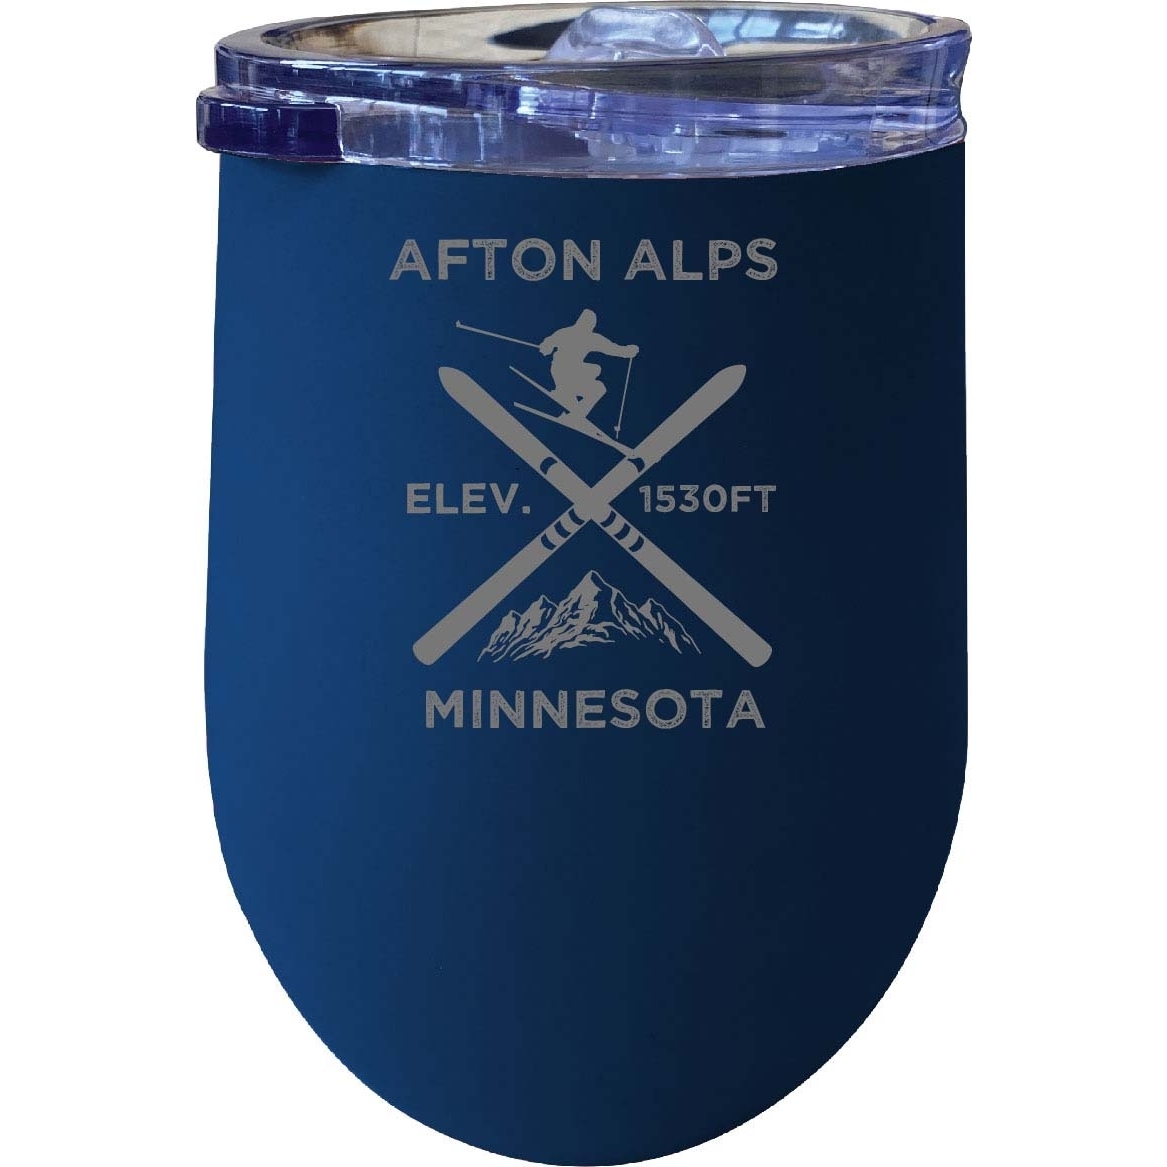 Afton Alps Minnesota Ski Souvenir 12 Oz Laser Etched Insulated Wine Stainless Steel Tumbler - Navy